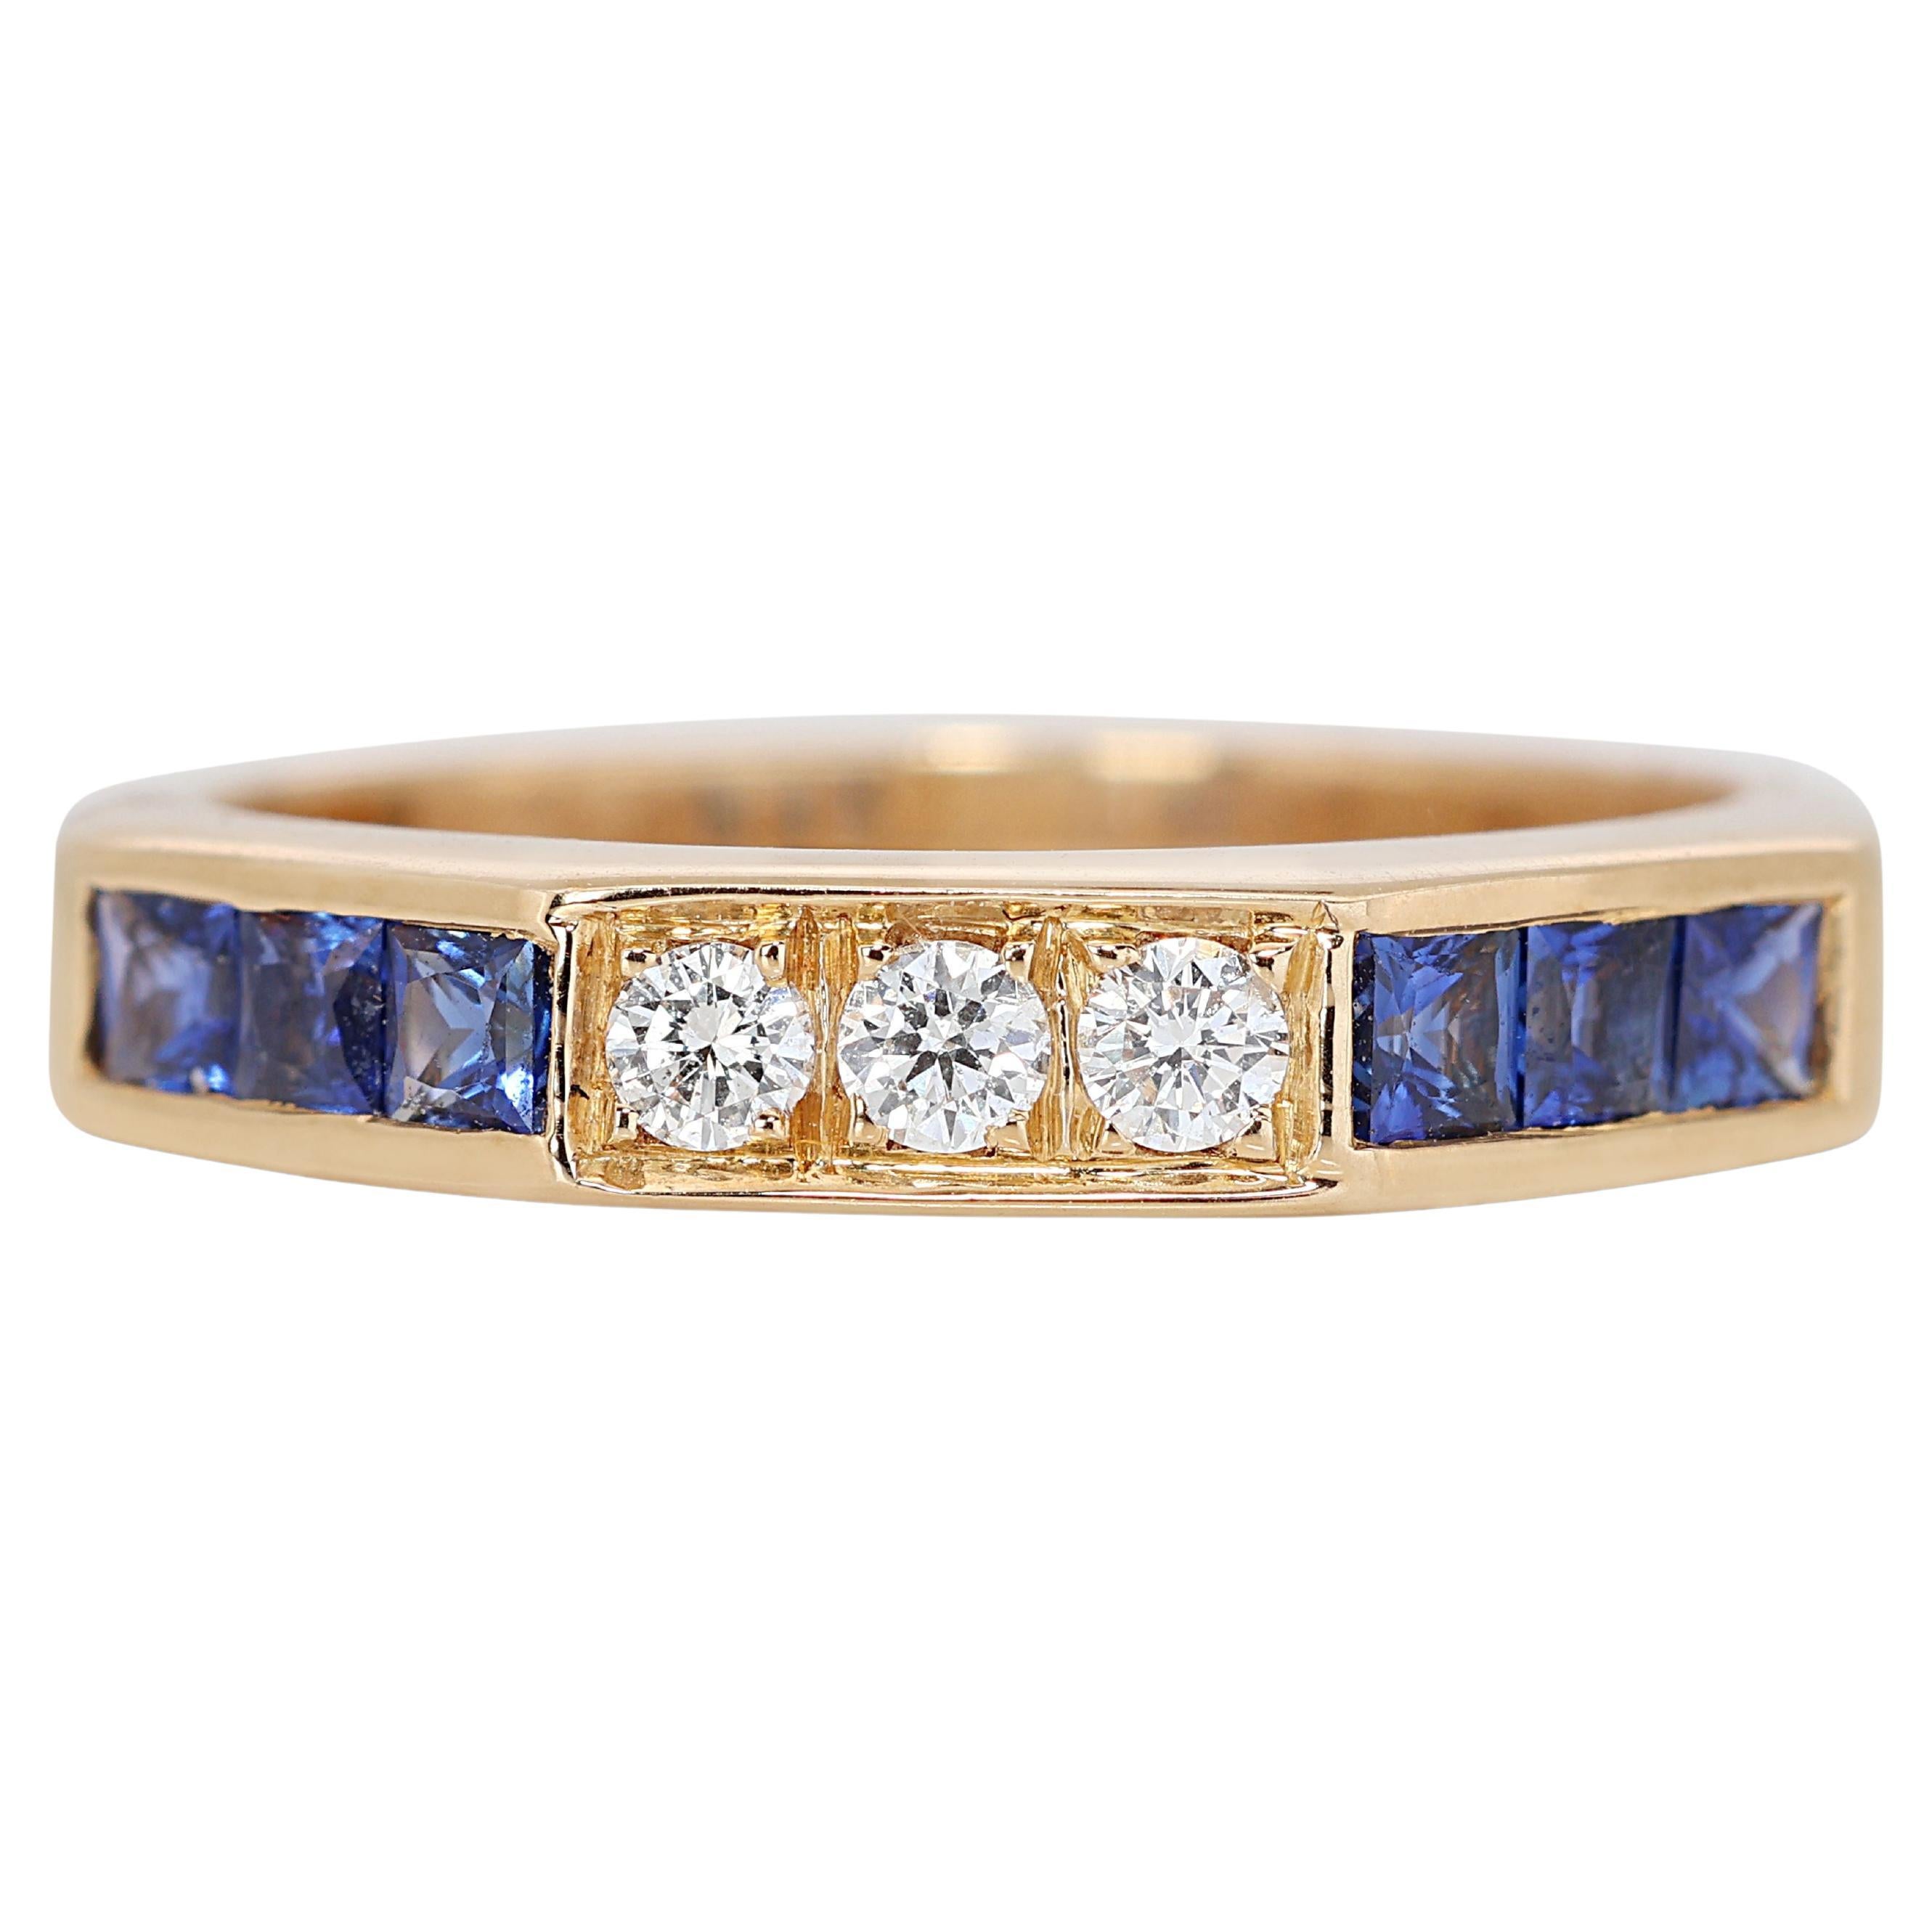 18K Yellow Gold Ring with Sapphires and Diamonds in 0.18ct